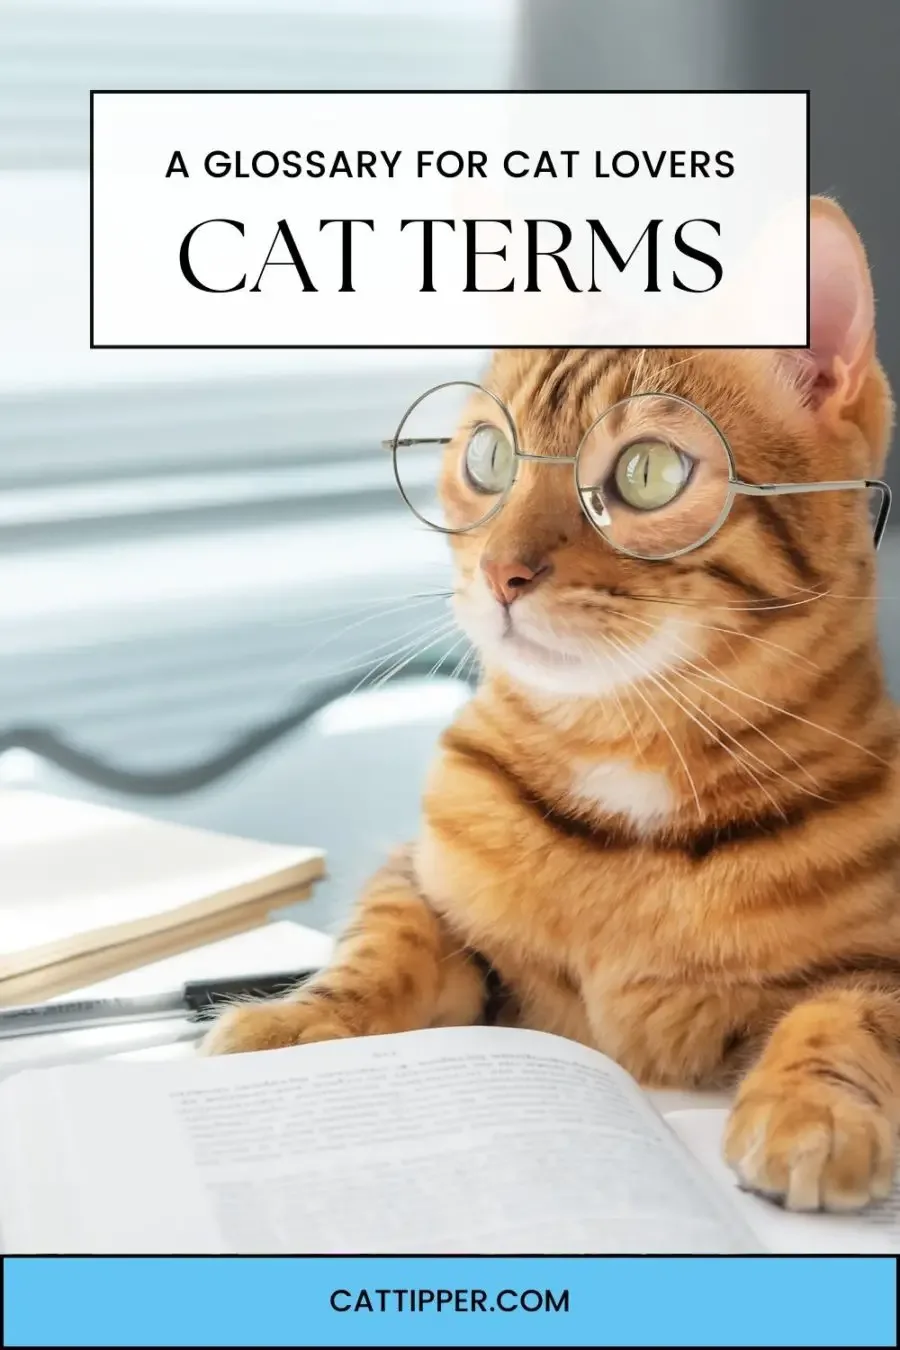 cat wearing glasses with book opened in front of his paws; words Cat Terms and A Glossary for Cat Lovers at top of image